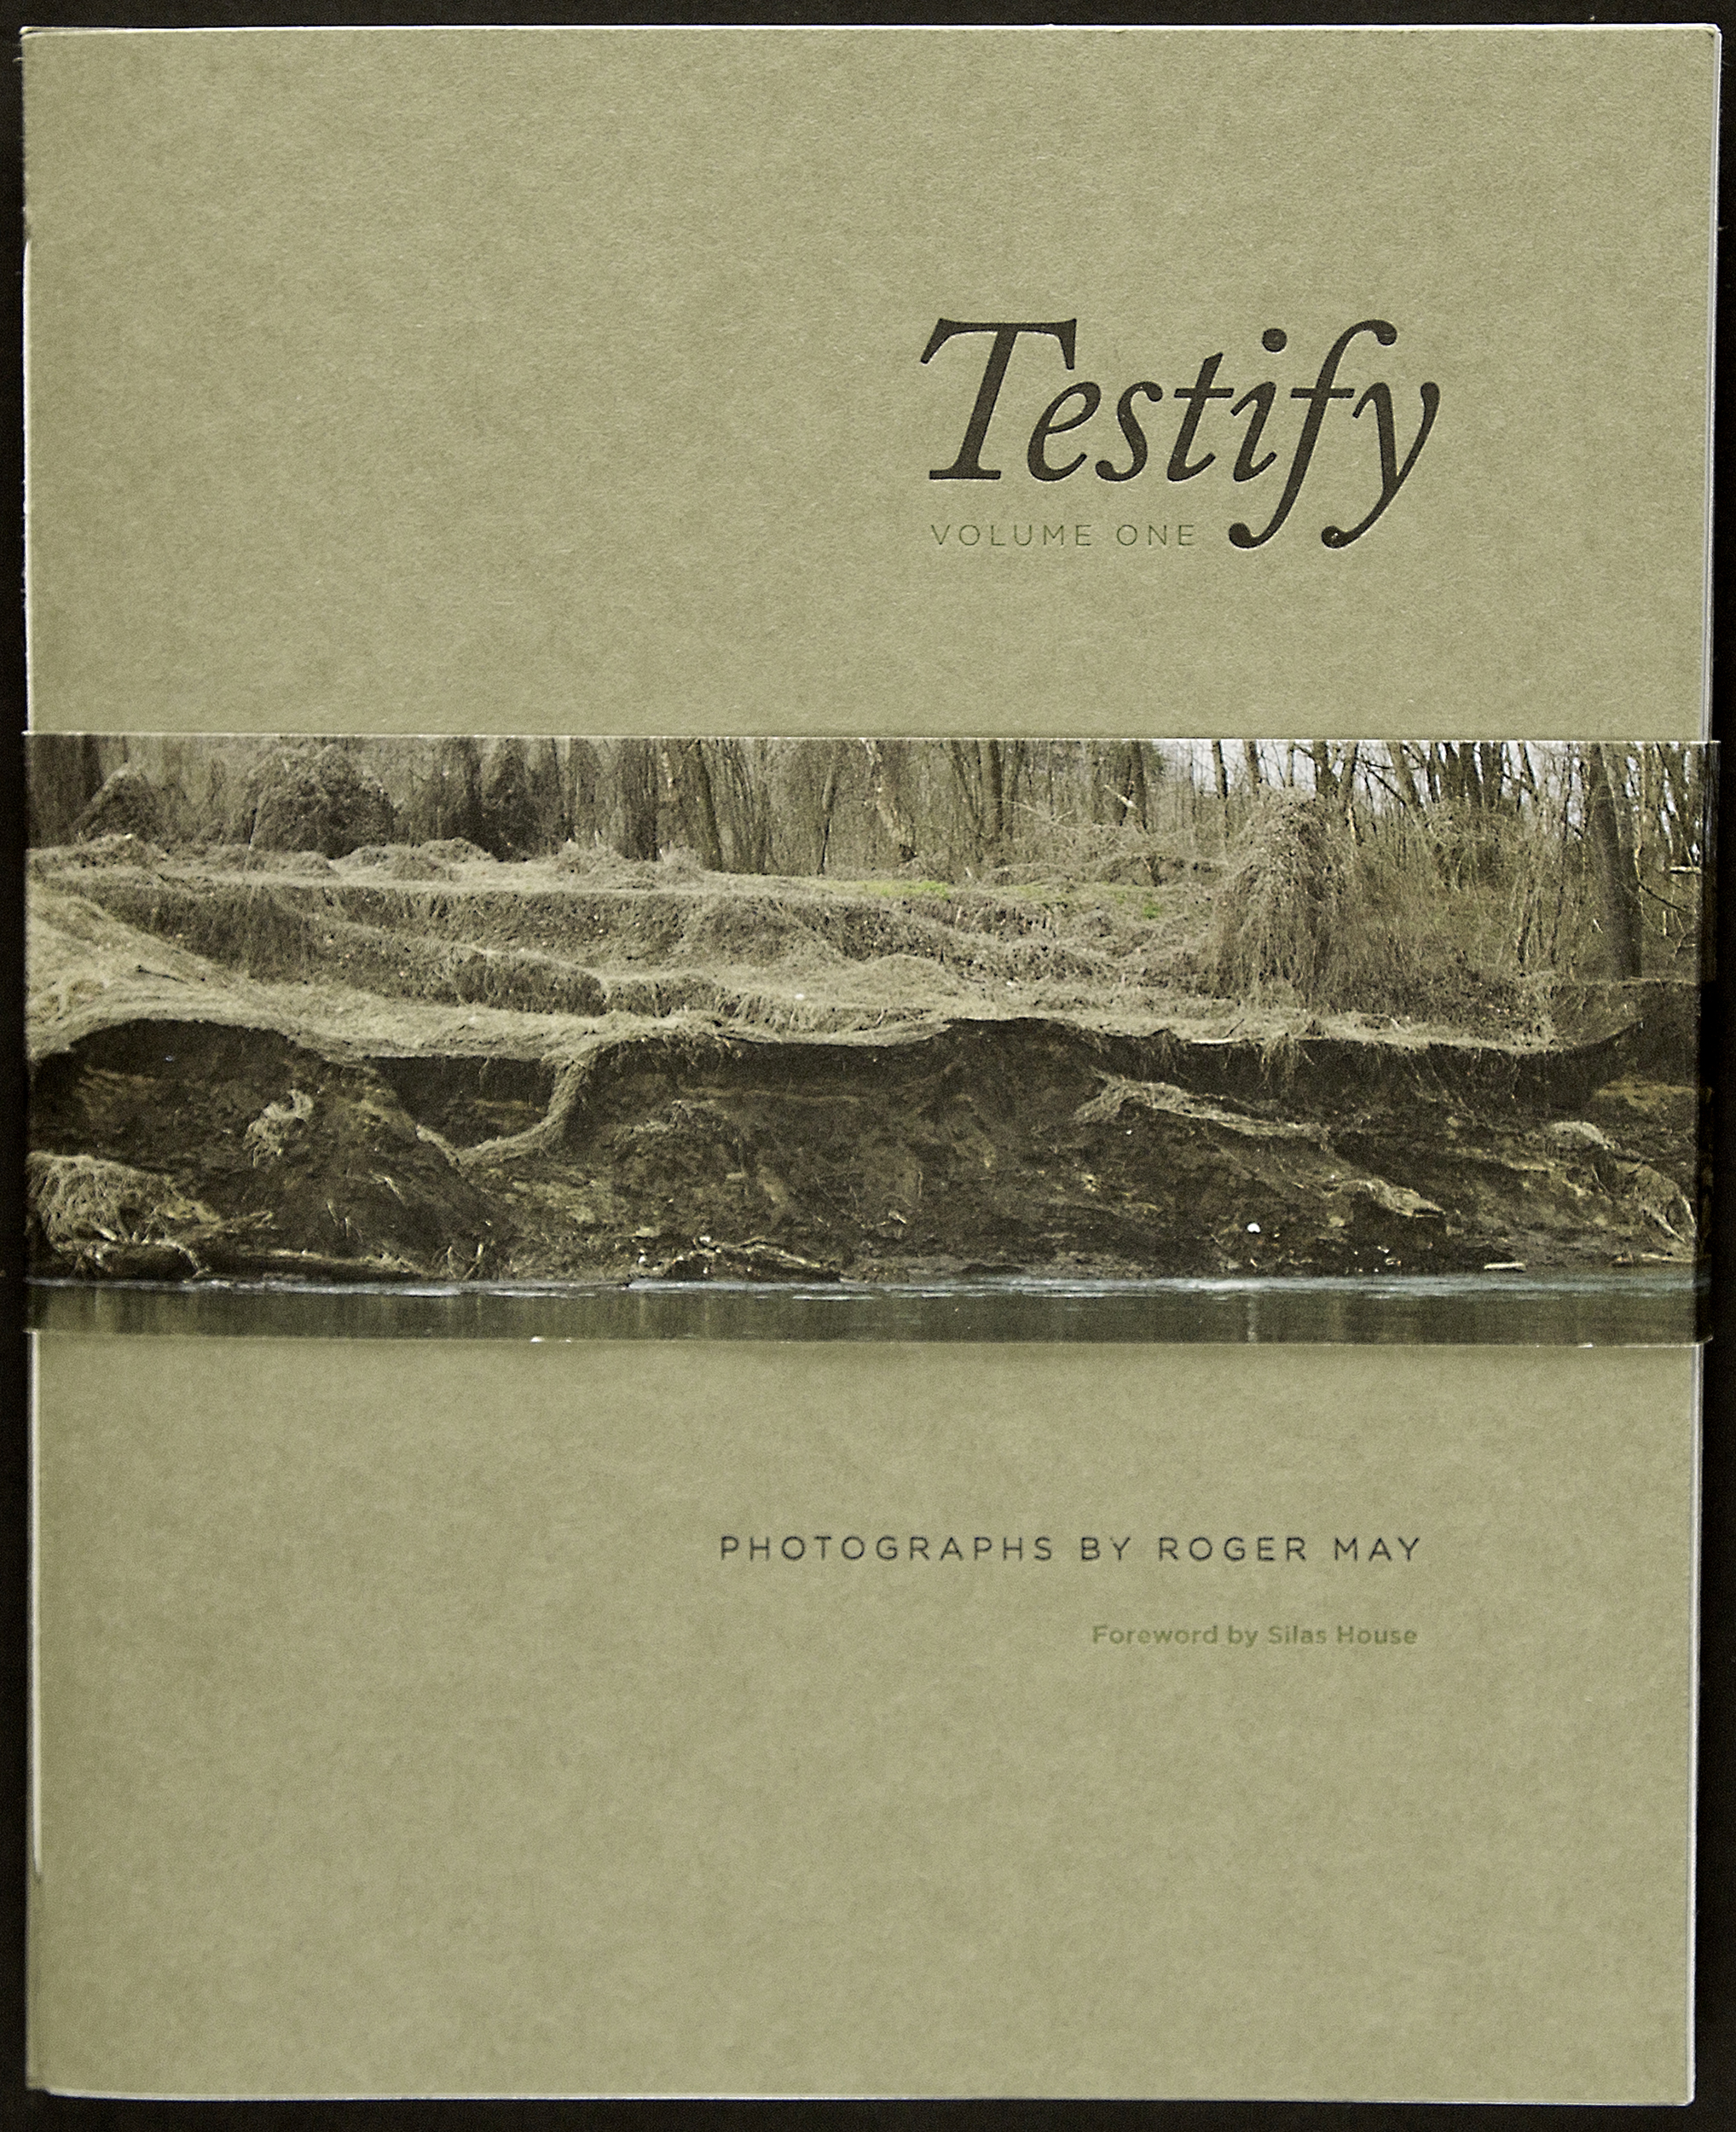  A printed bellyband holds the two volumes of this poetry collection together. The image is of the Tug River which separates West Virginia from Kentucky, the two states where Roger made the photographs in this collection. 